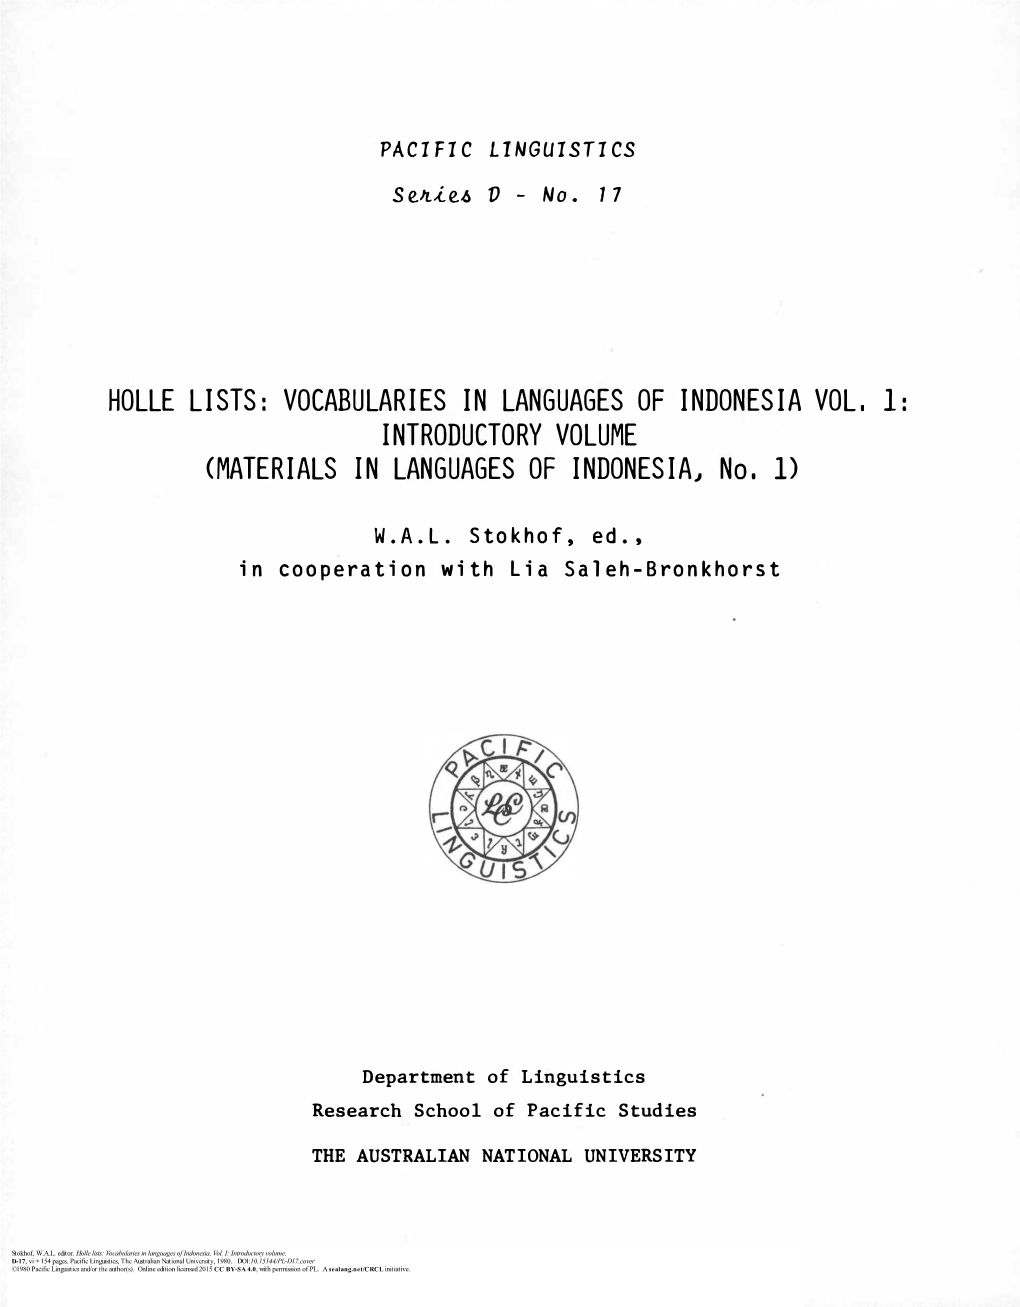 Holle Lists: Vocabularies in Languages of Indonesia, Vol. I: Introductory Volume